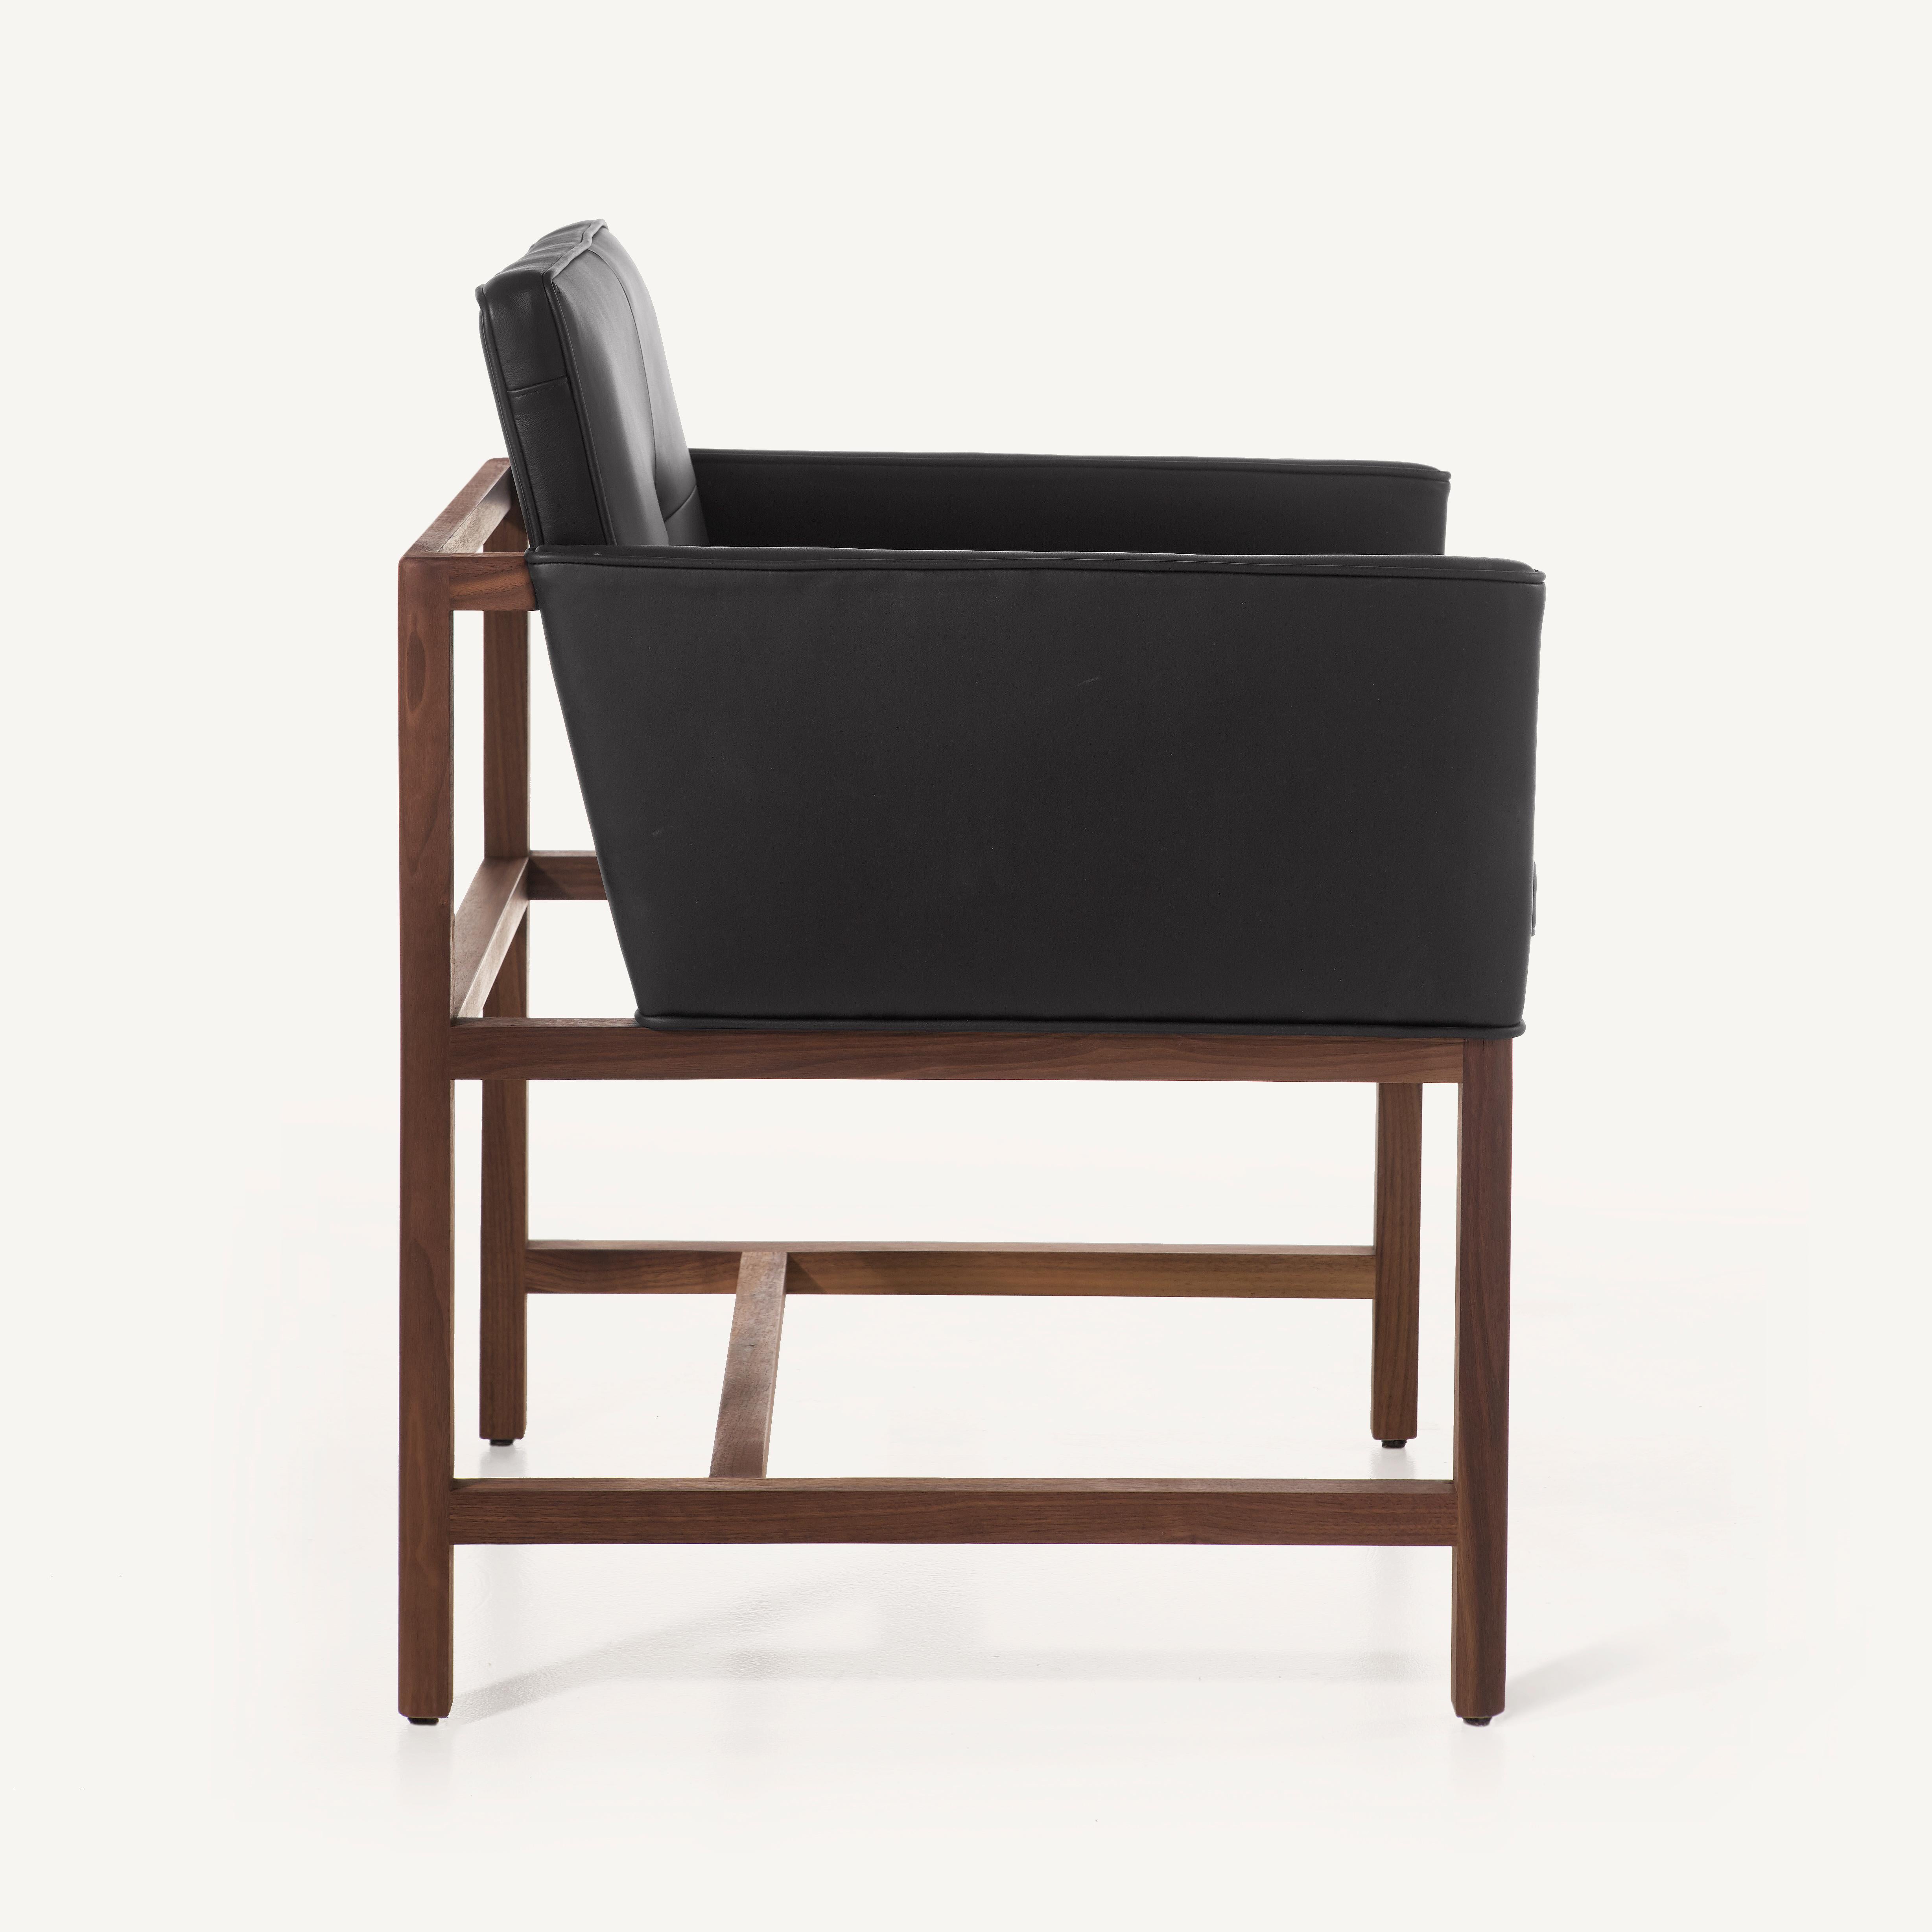 For Sale: Black (Comfort 99991 Black) Wood Frame Armchair in Solid Walnut and Leather Designed by Craig Bassam 5